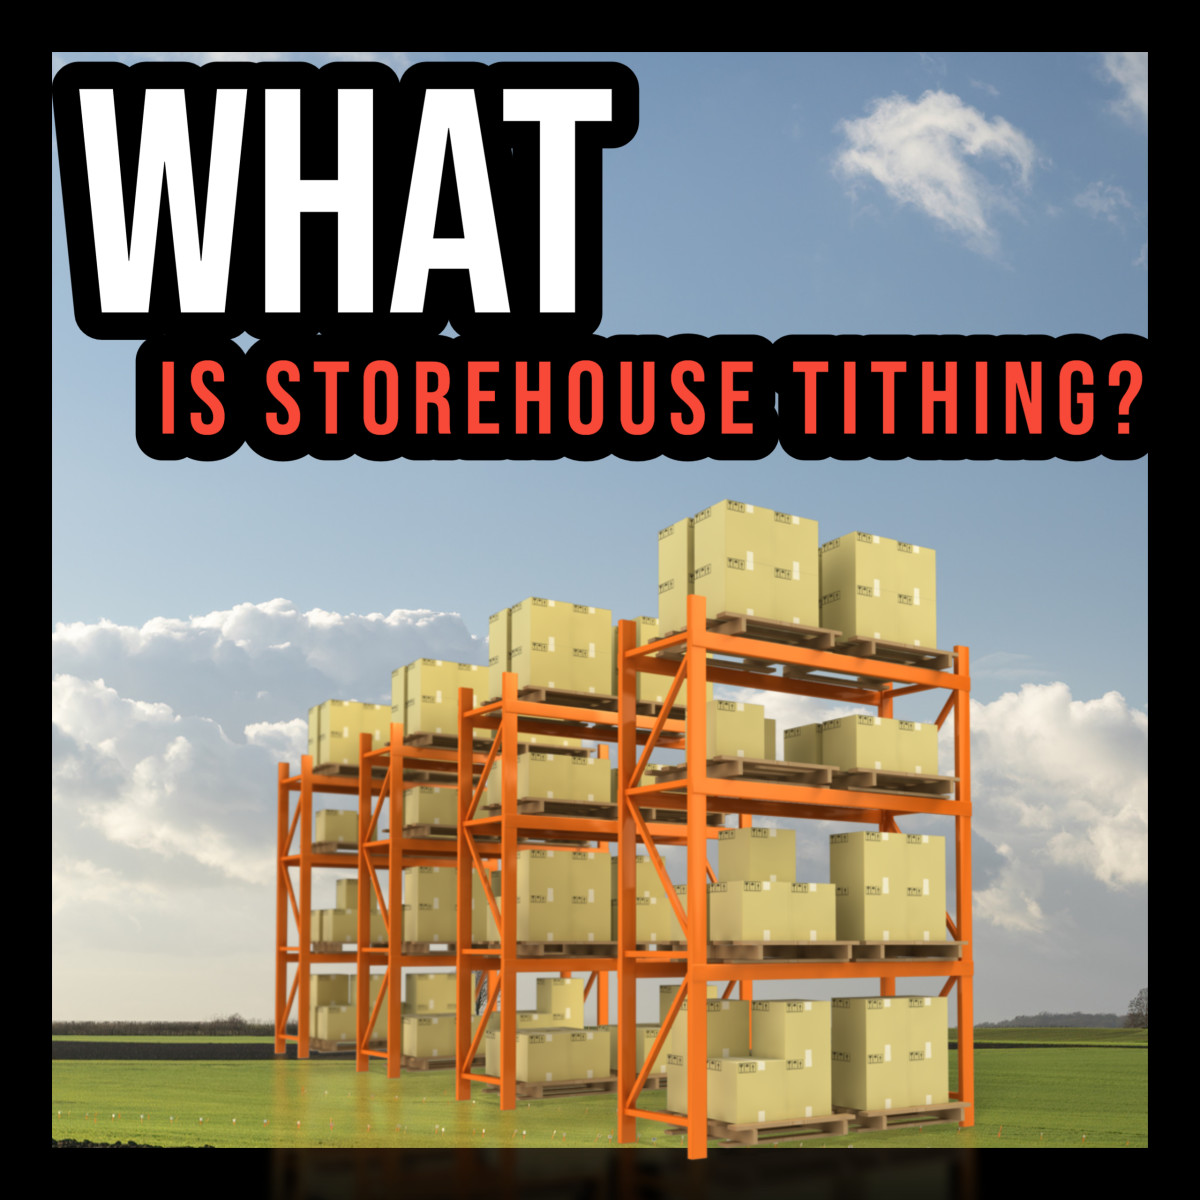 What is storehouse tithing?